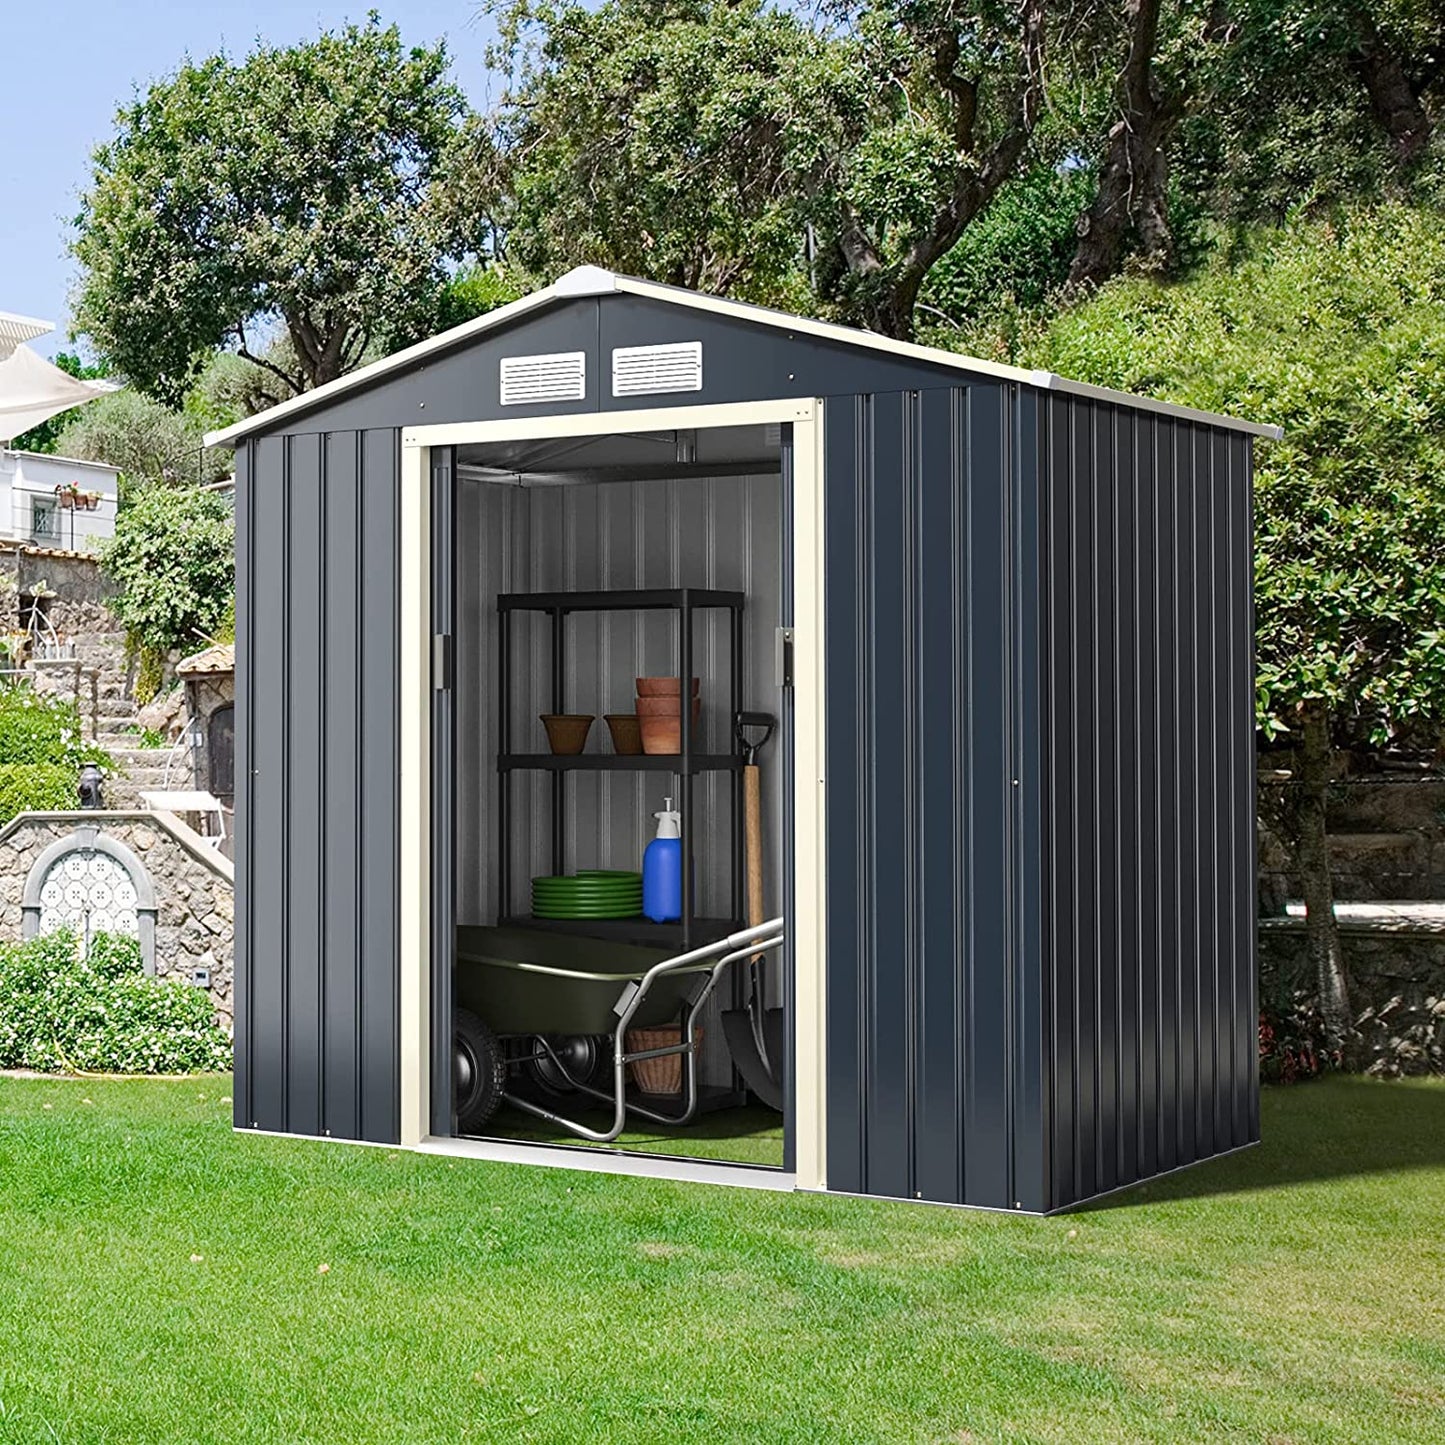 7 x 4 FT Outdoor Patio Metal Storage Shed Building Organizer with Double Sliding Doors and 4 Vents